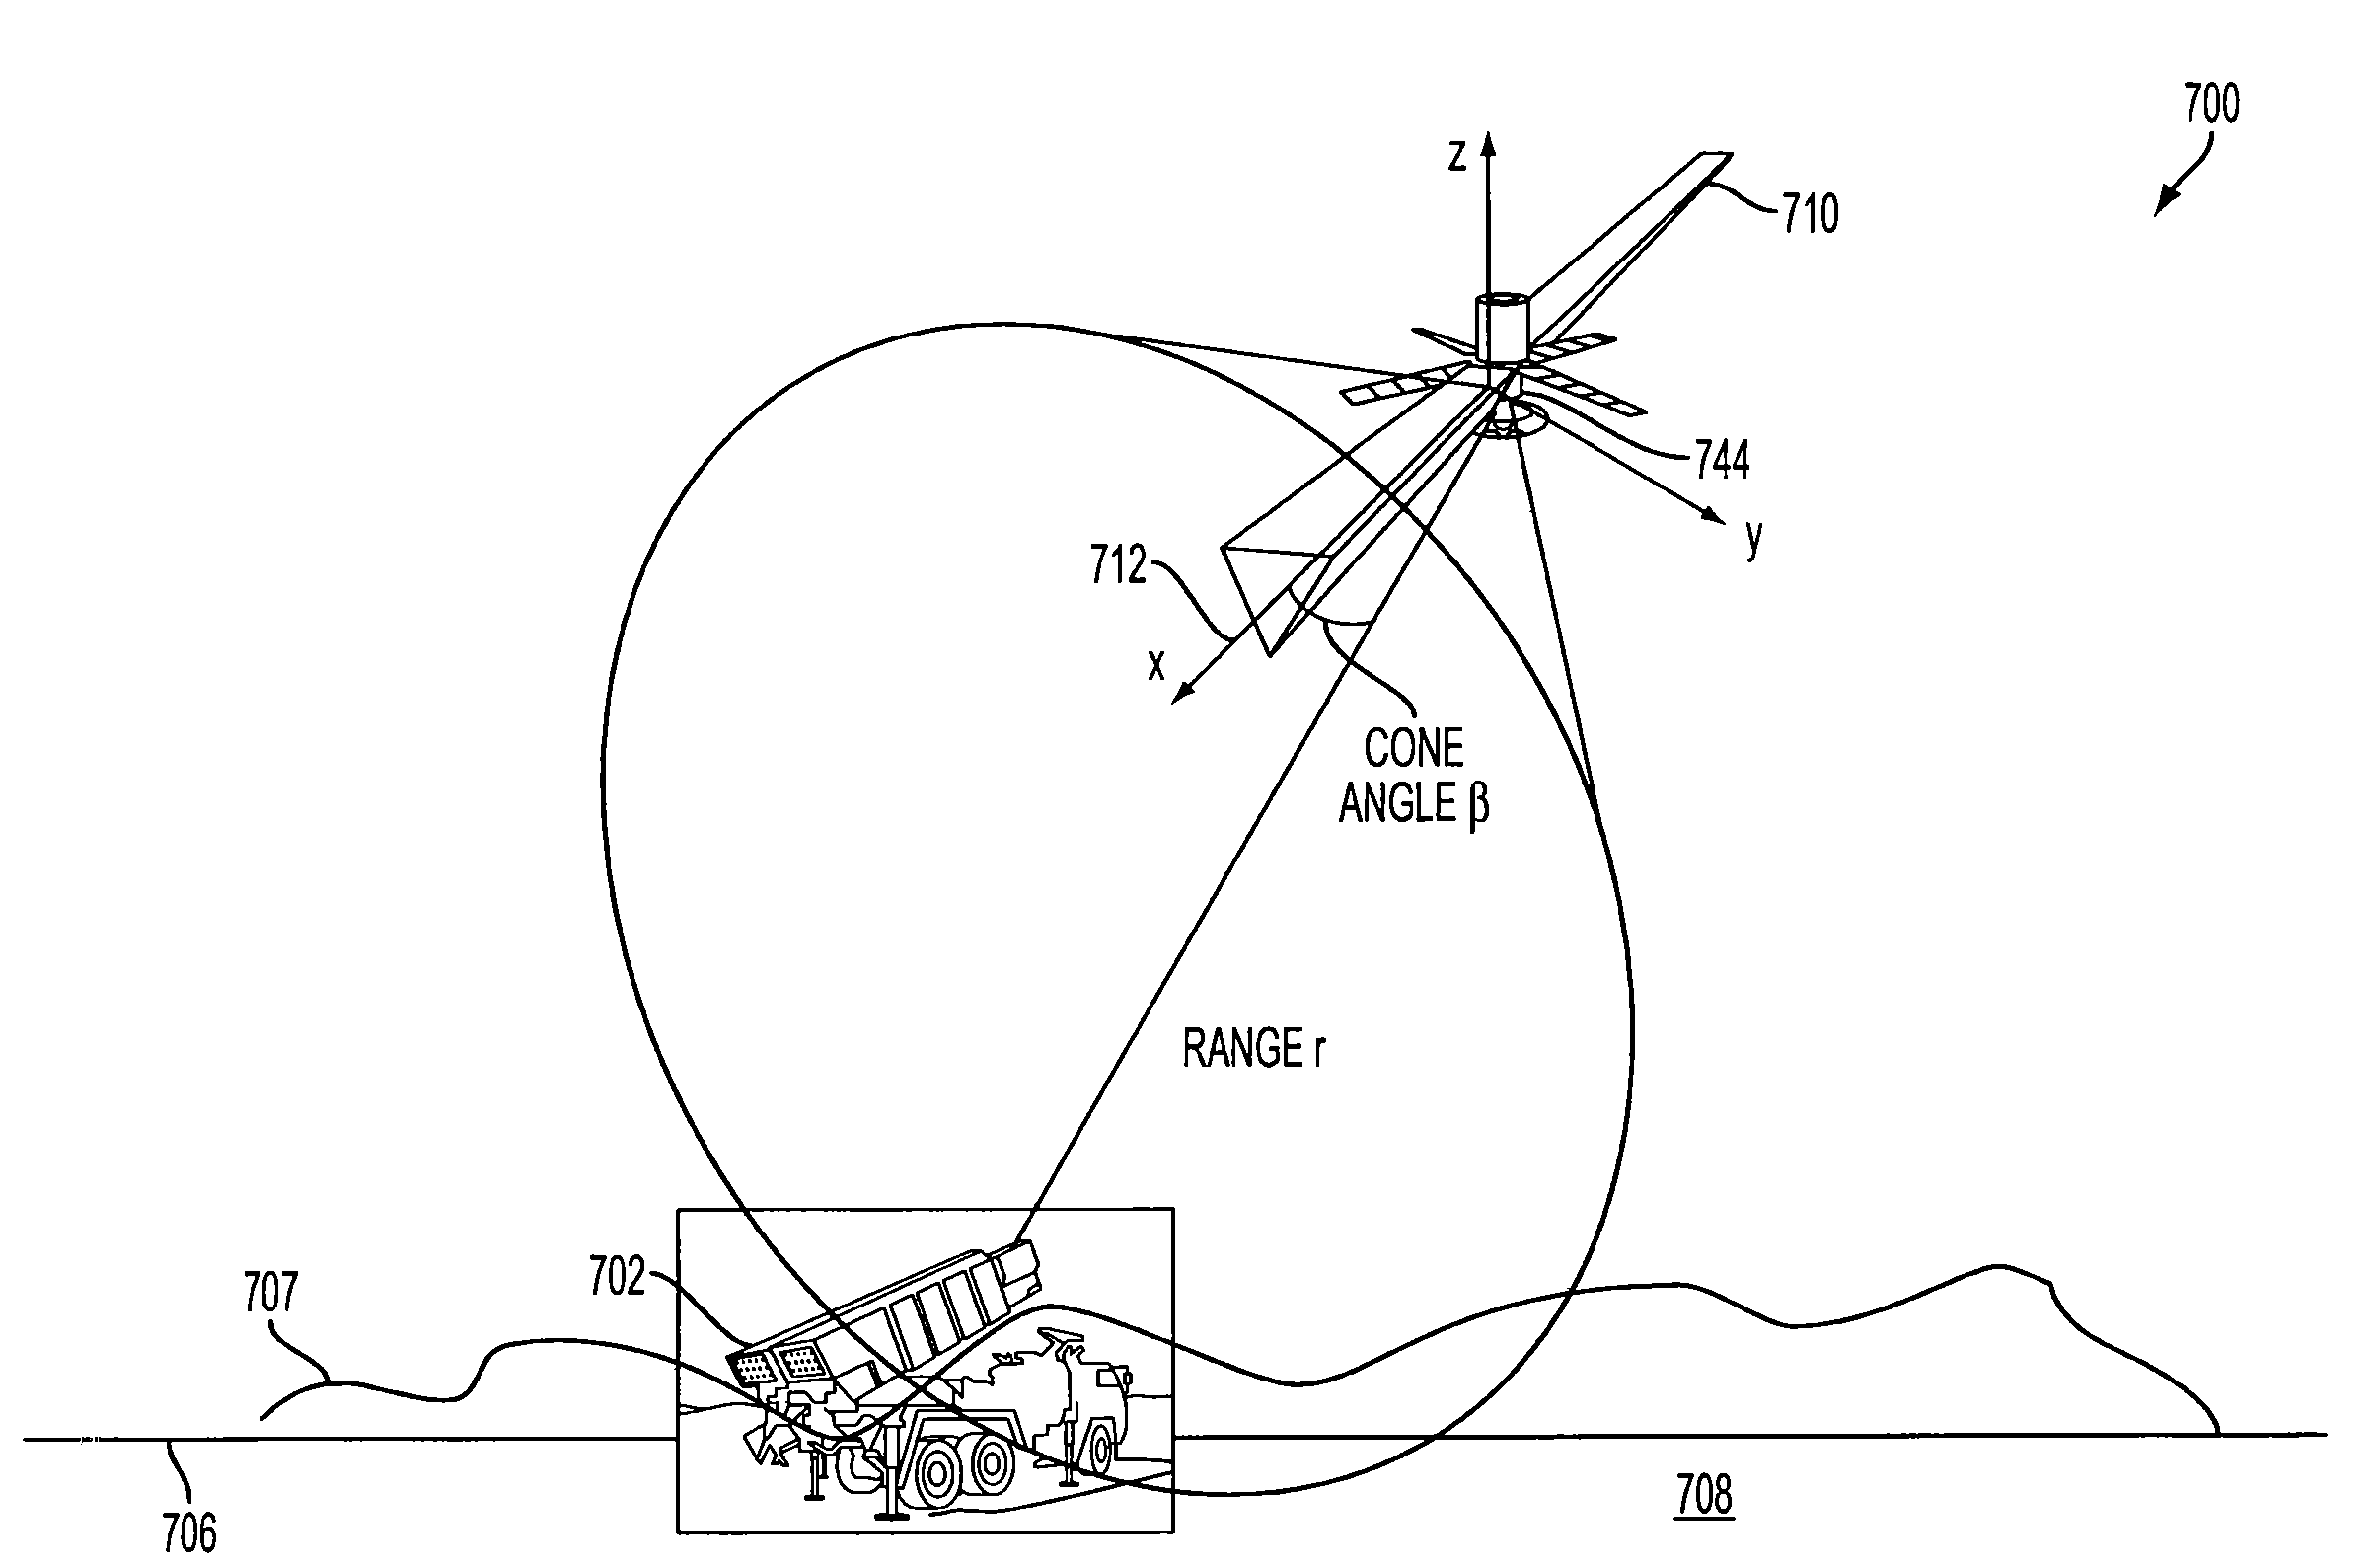 System and method for locating targets using measurements from a space based radar